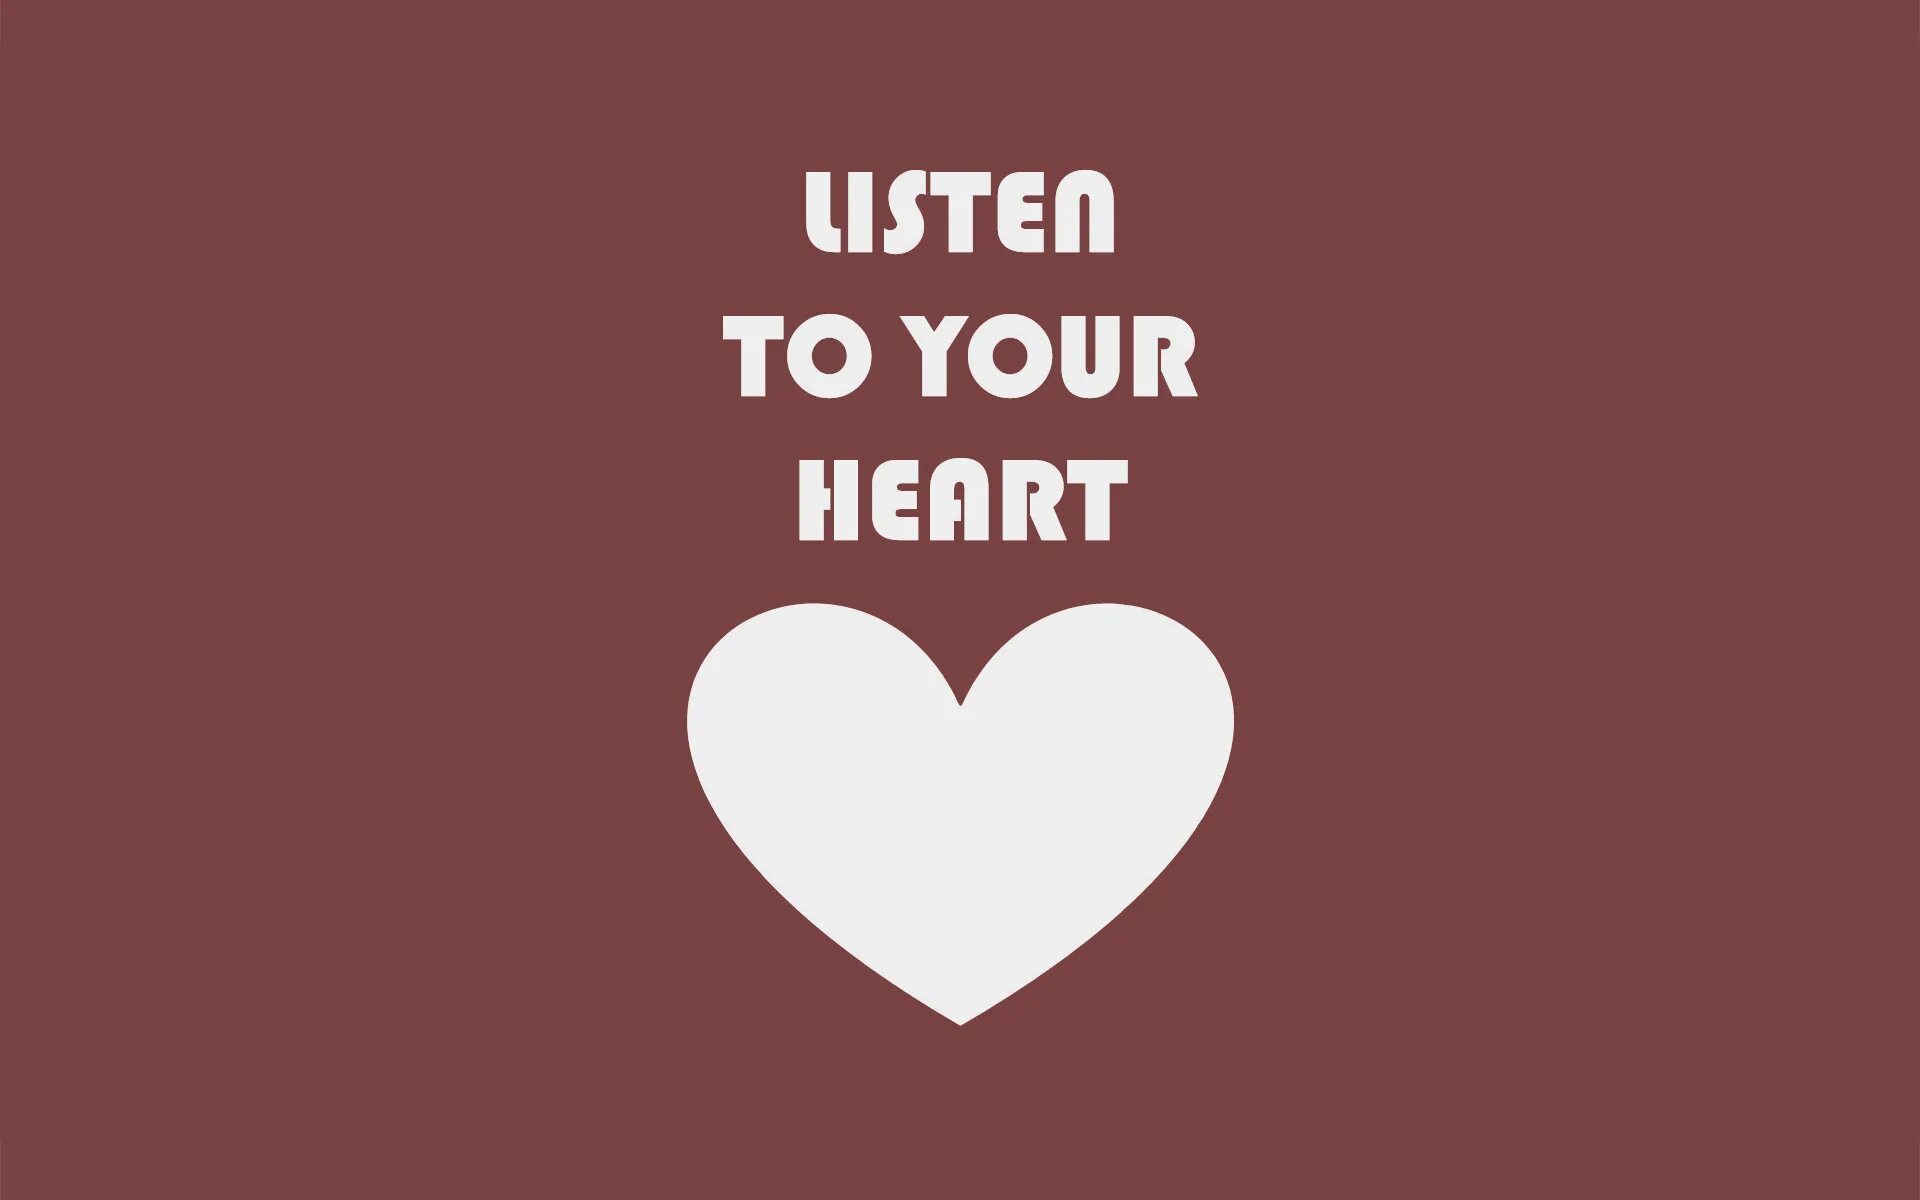 Listen to your Heart. Your Heart. Yours hers. Listen your Heart. Best of your heart